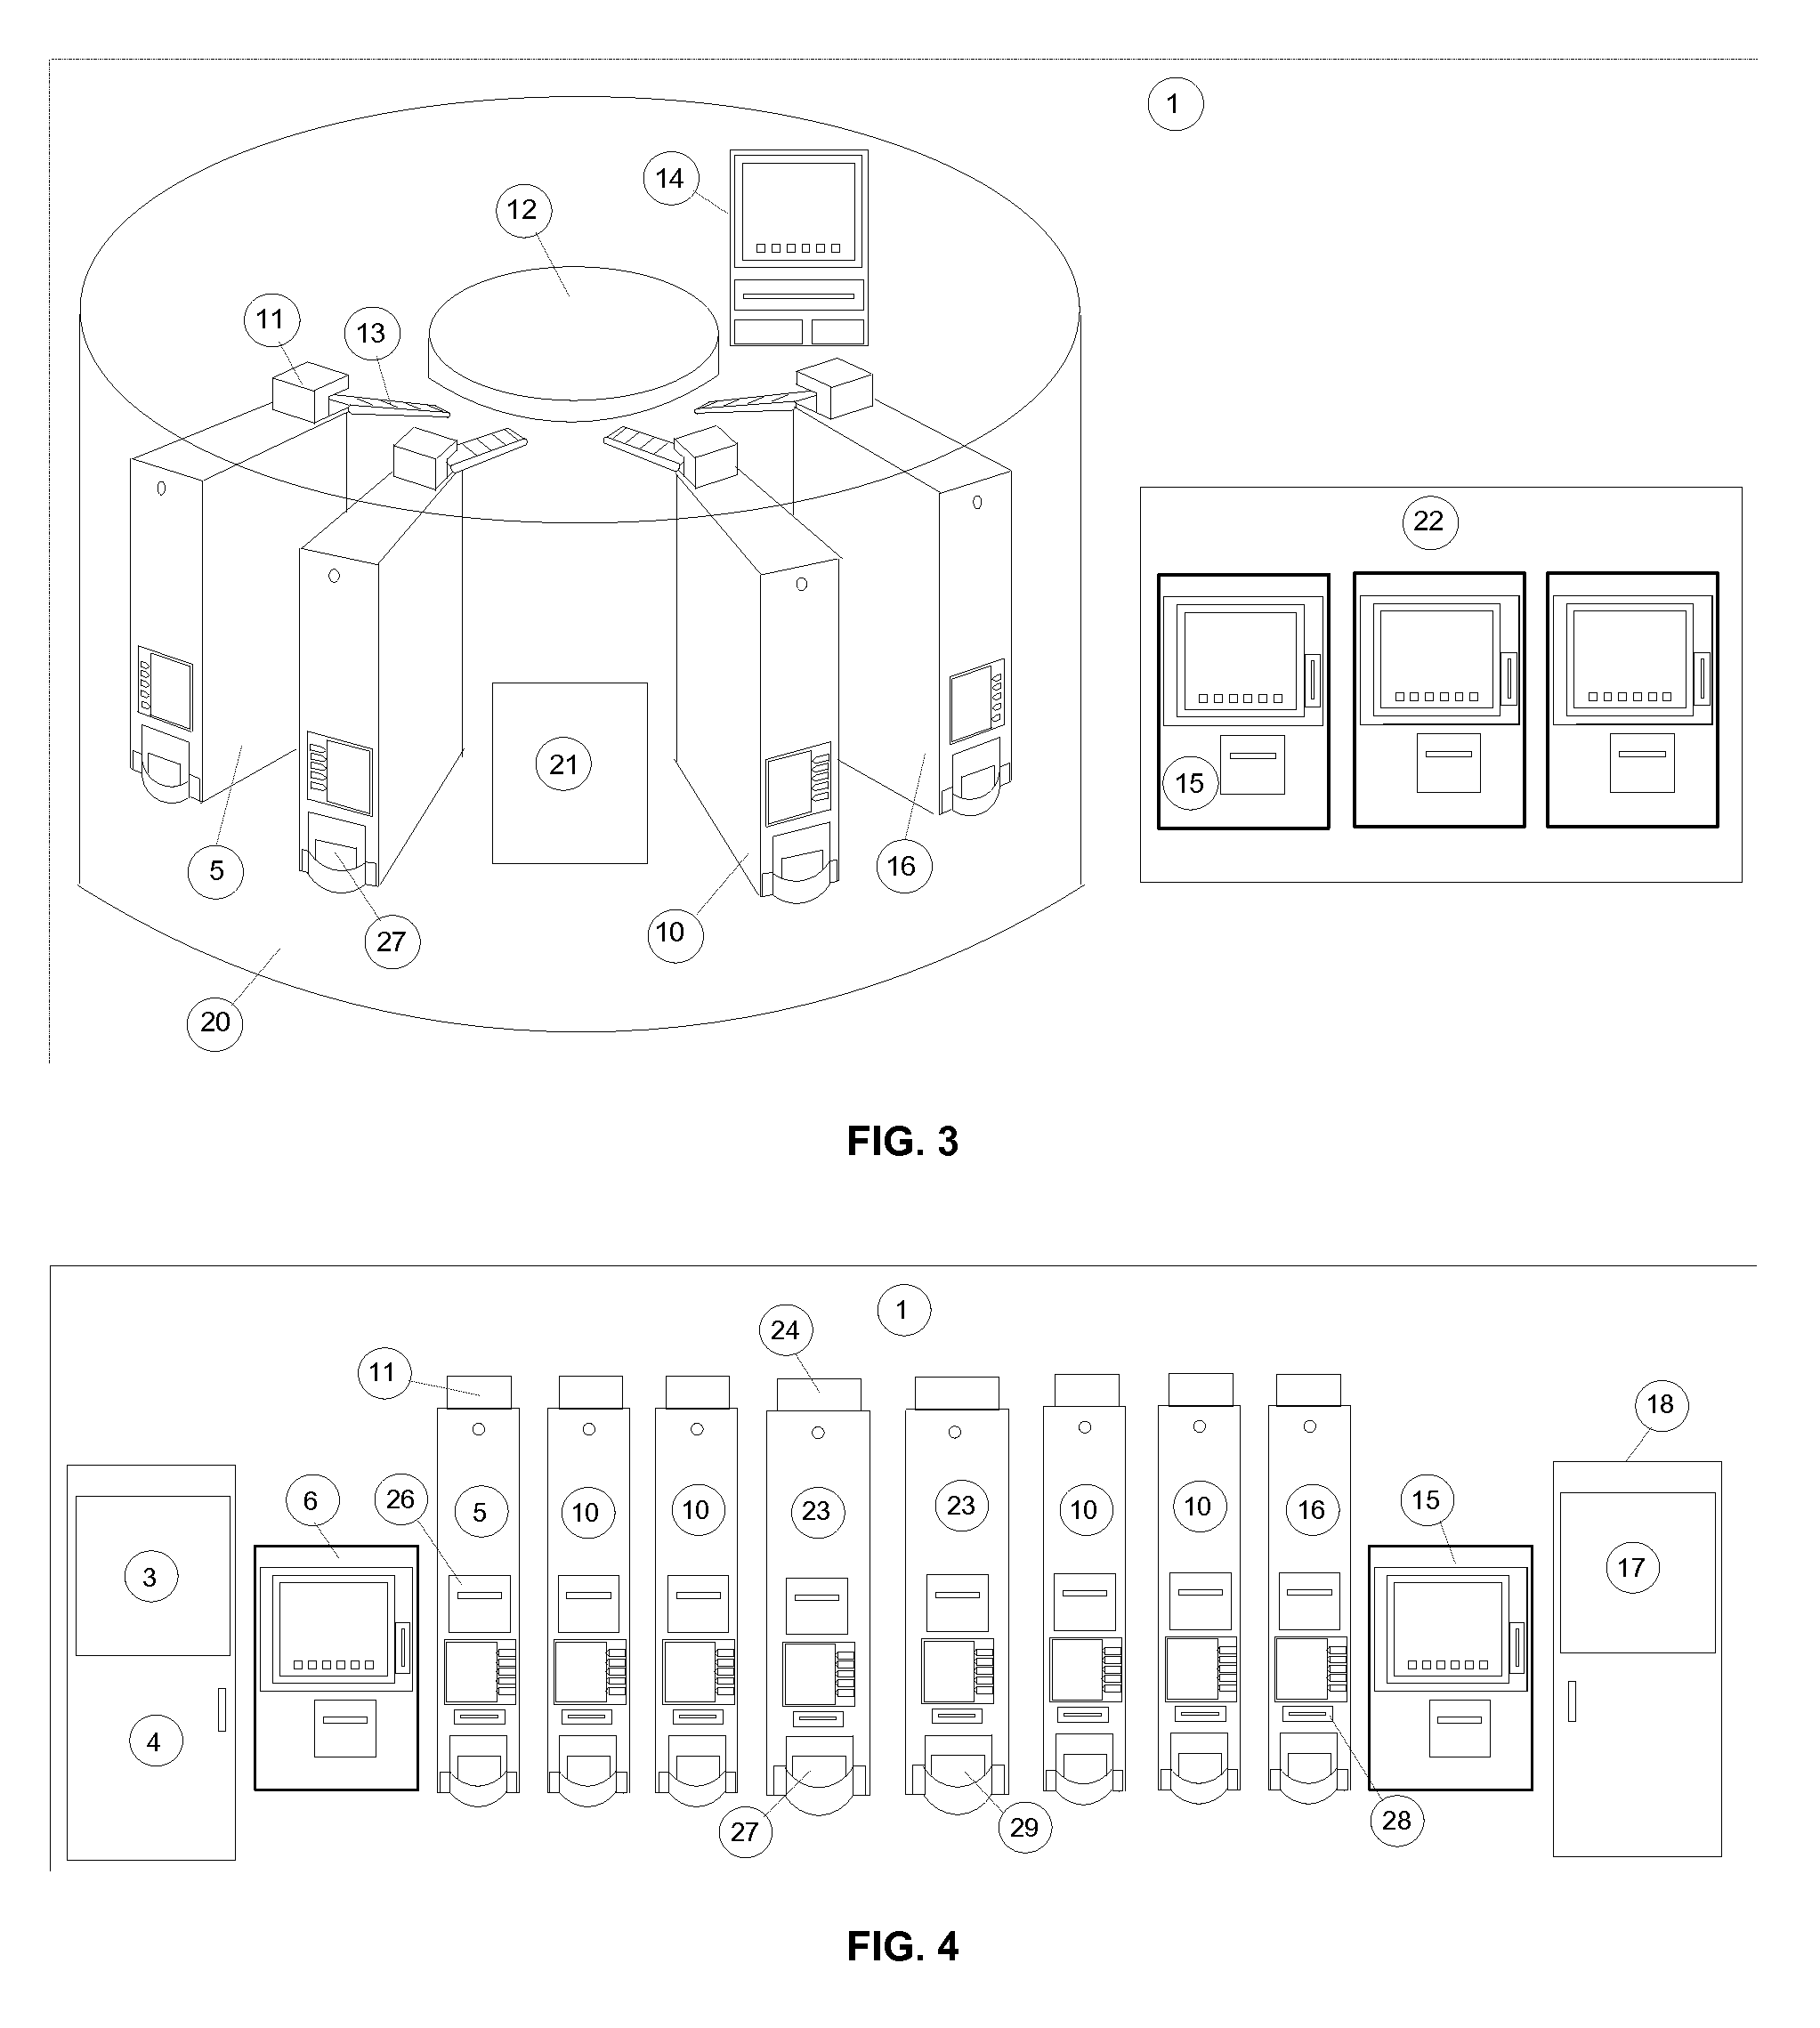 Automatic distributed vending system